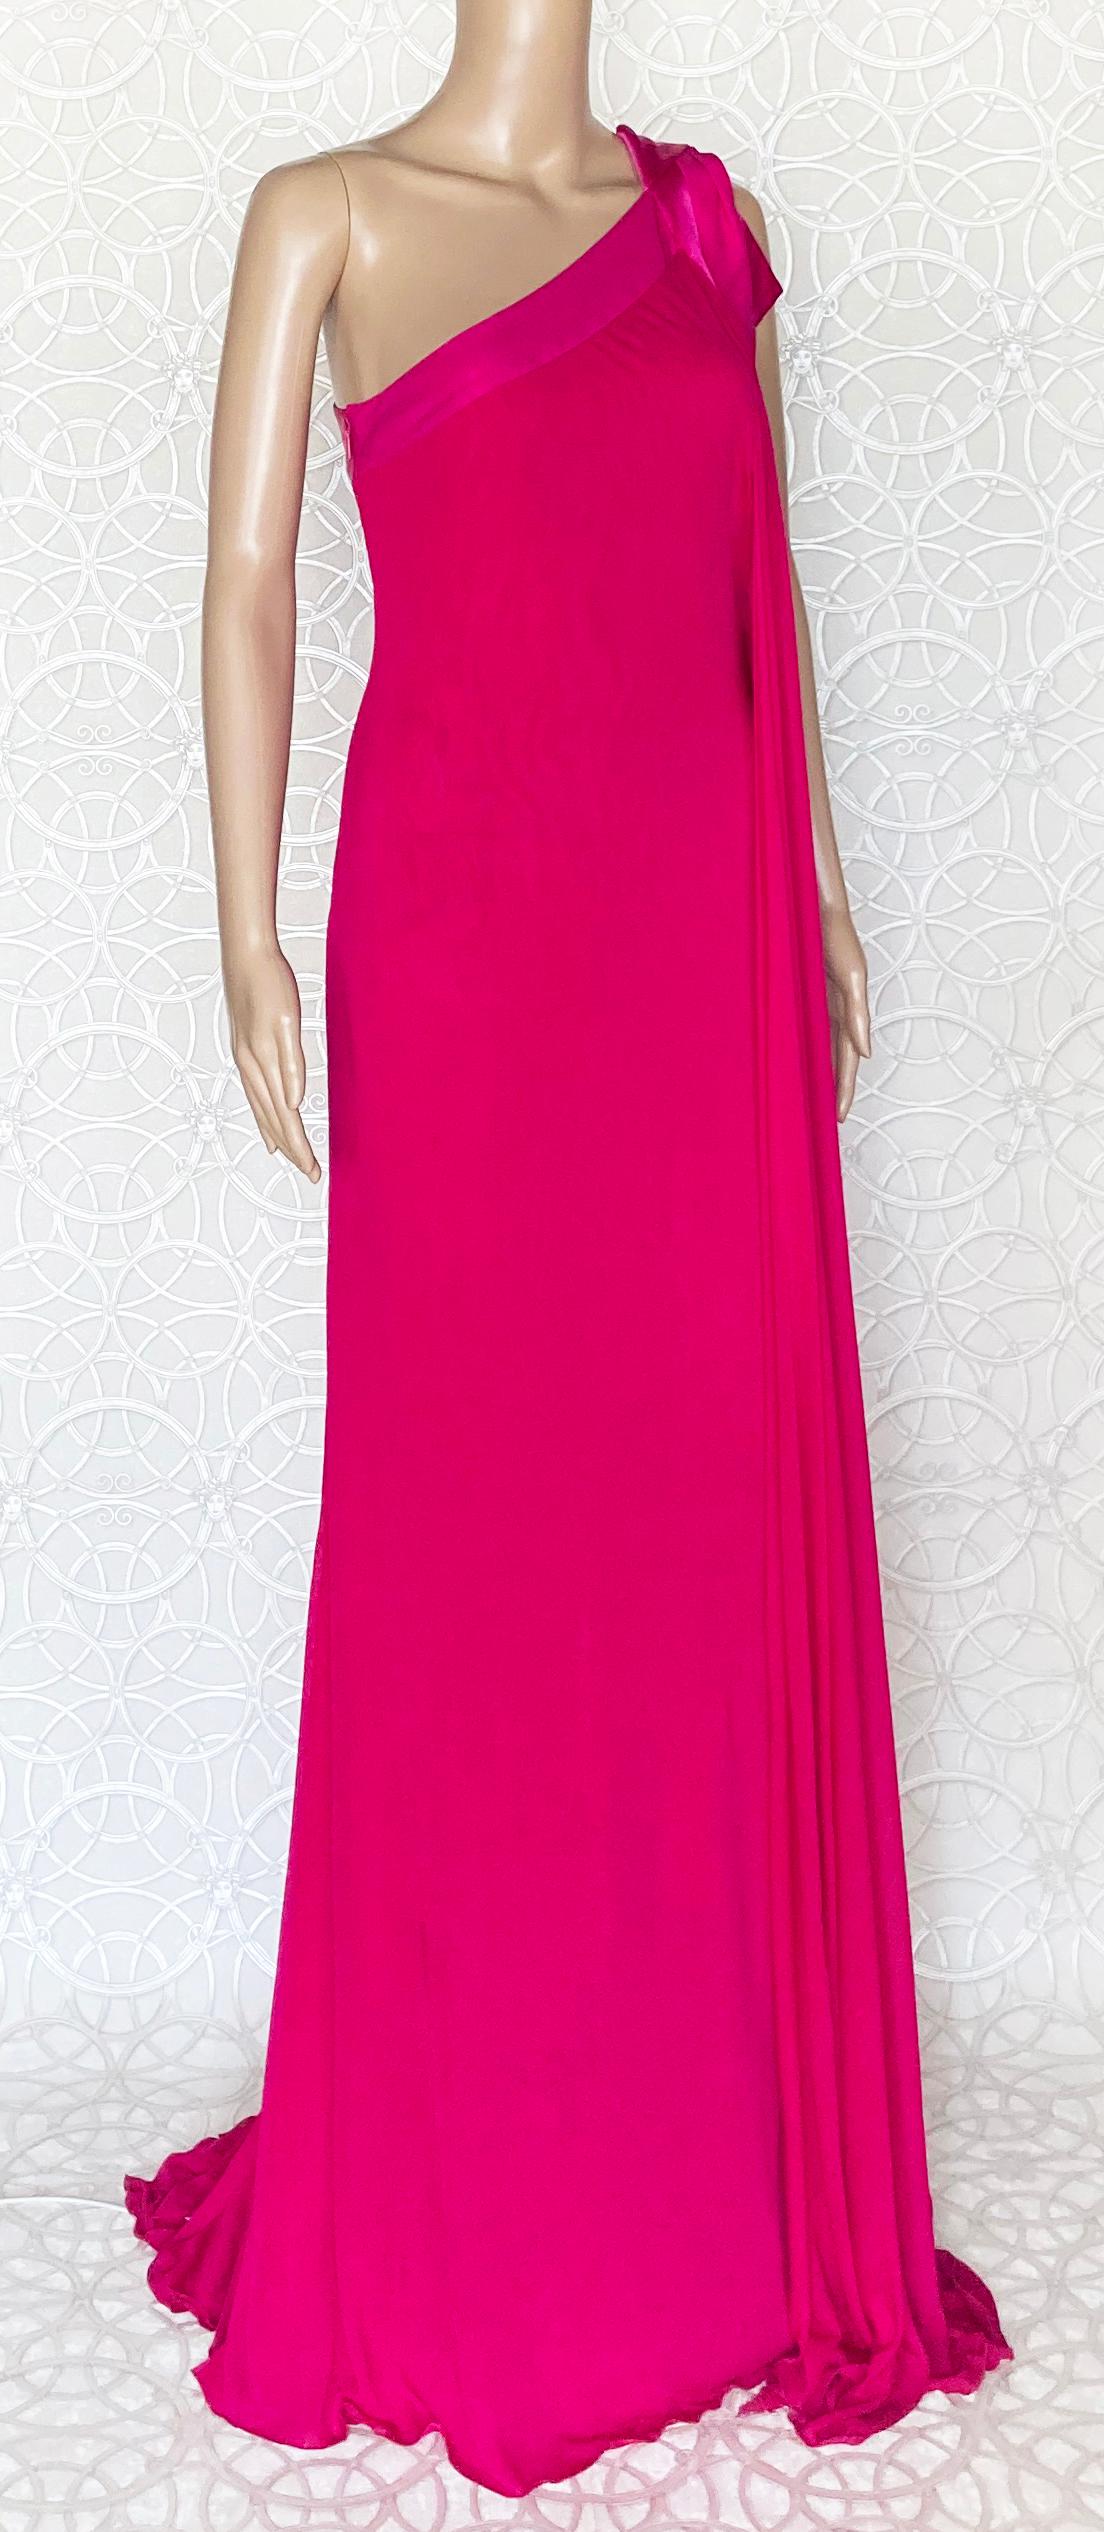 NEW VERSACE FUCHSIA SILK ONE SHOULDER OPEN BACK Gown 44 - 8 For Sale 4